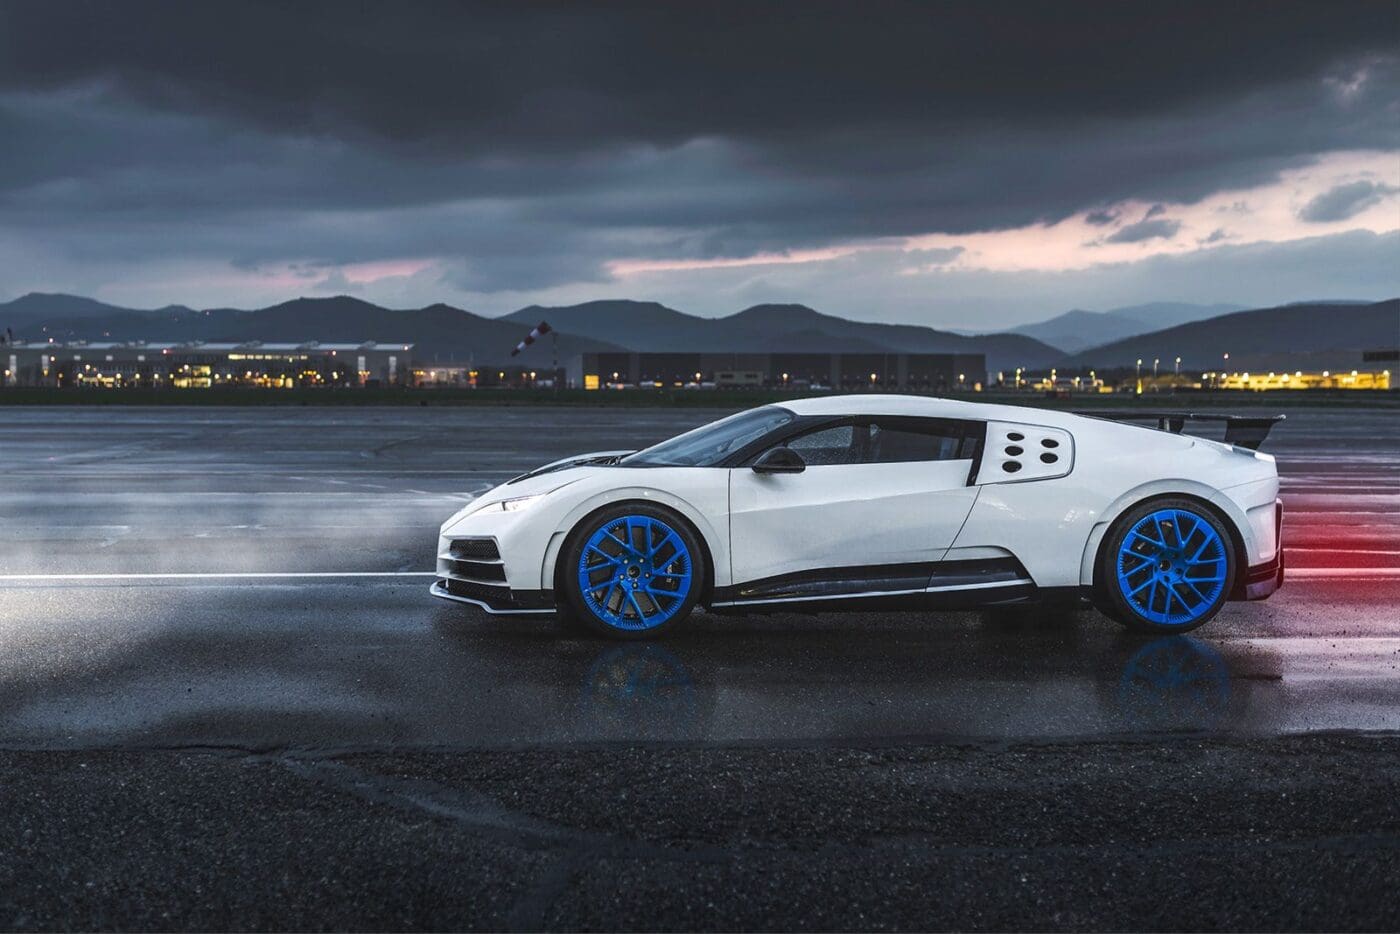 The Bugatti Centodieci Nears Completion With Nighttime Testing